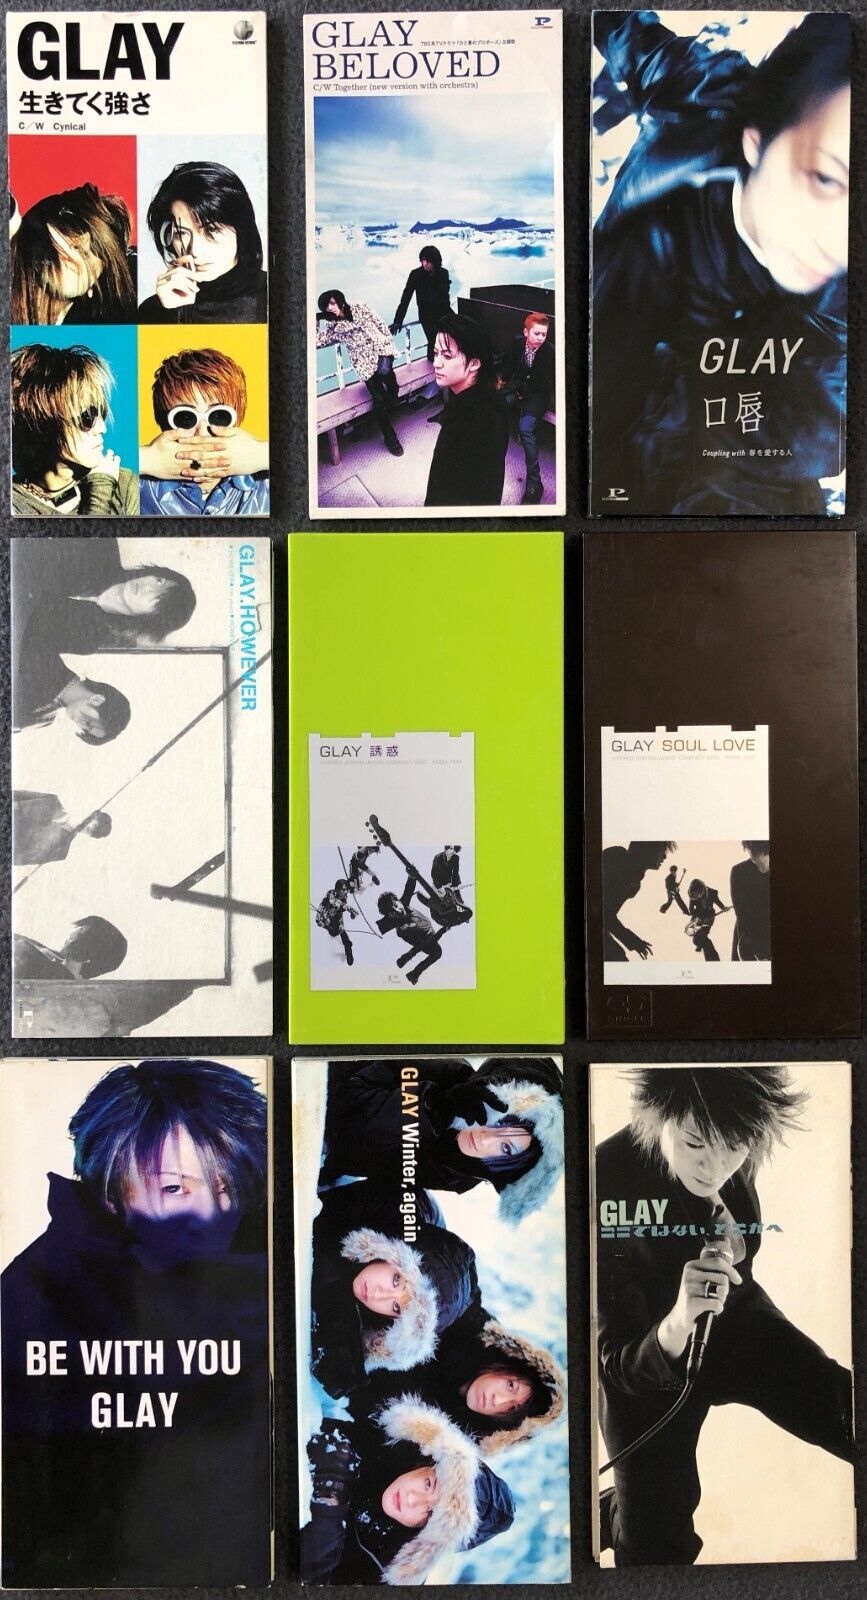 9x 3” CD Singles GLAY 生きてく強さ Beloved 口唇 However 誘惑 Soul Love Be With You +2 More